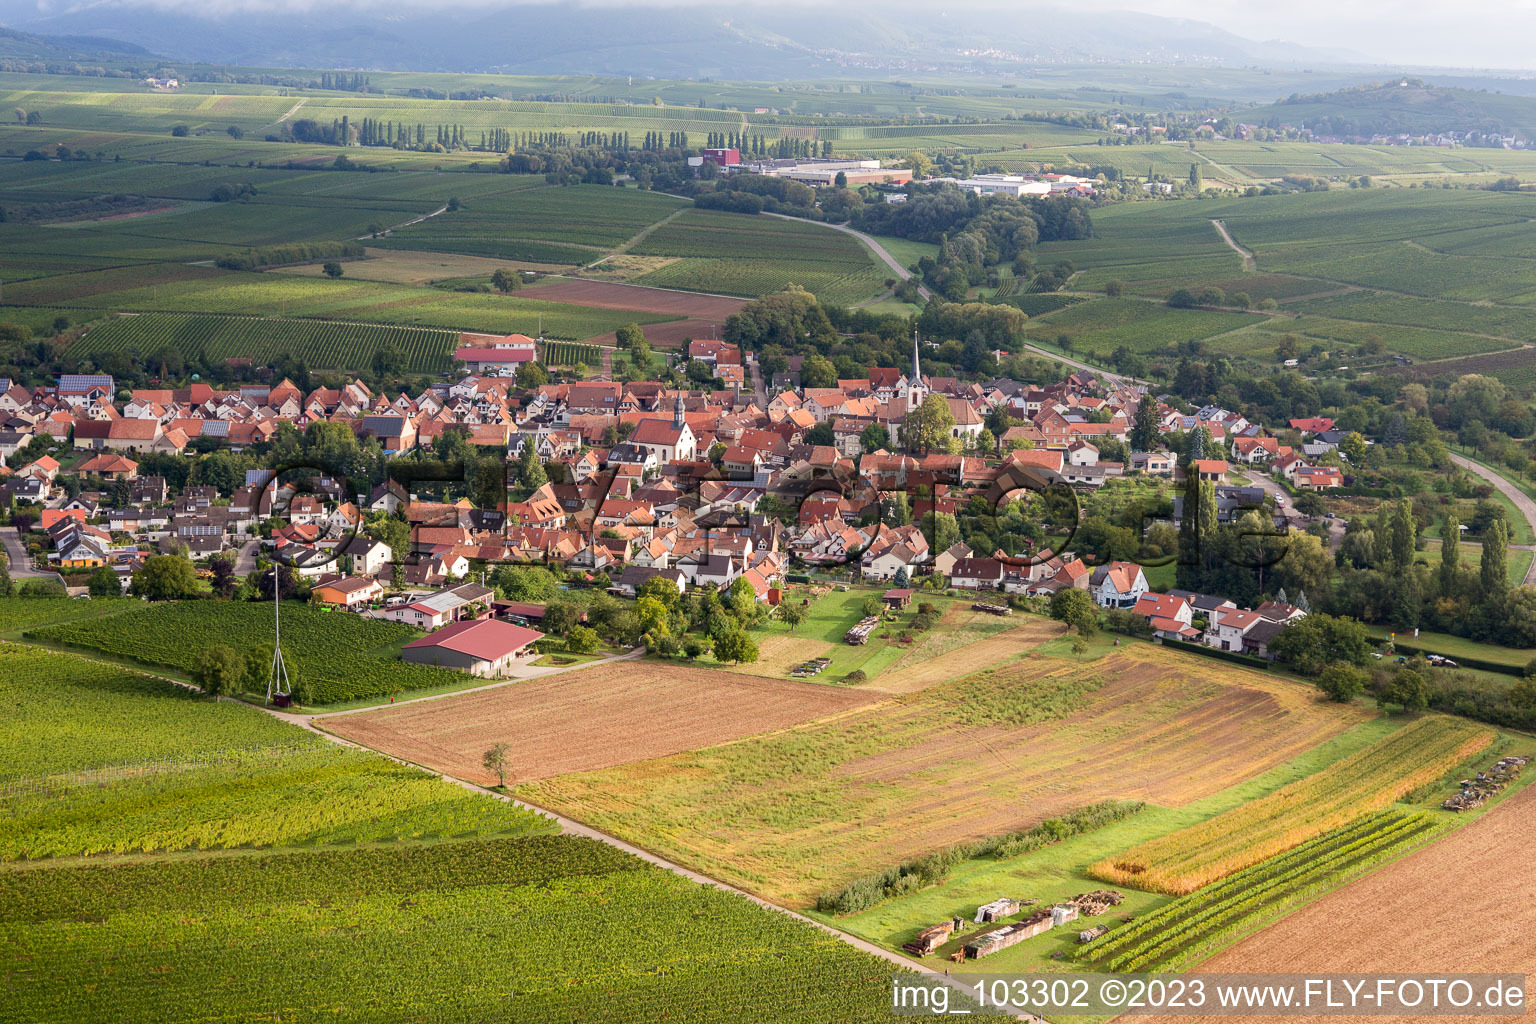 Drone recording of Göcklingen in the state Rhineland-Palatinate, Germany